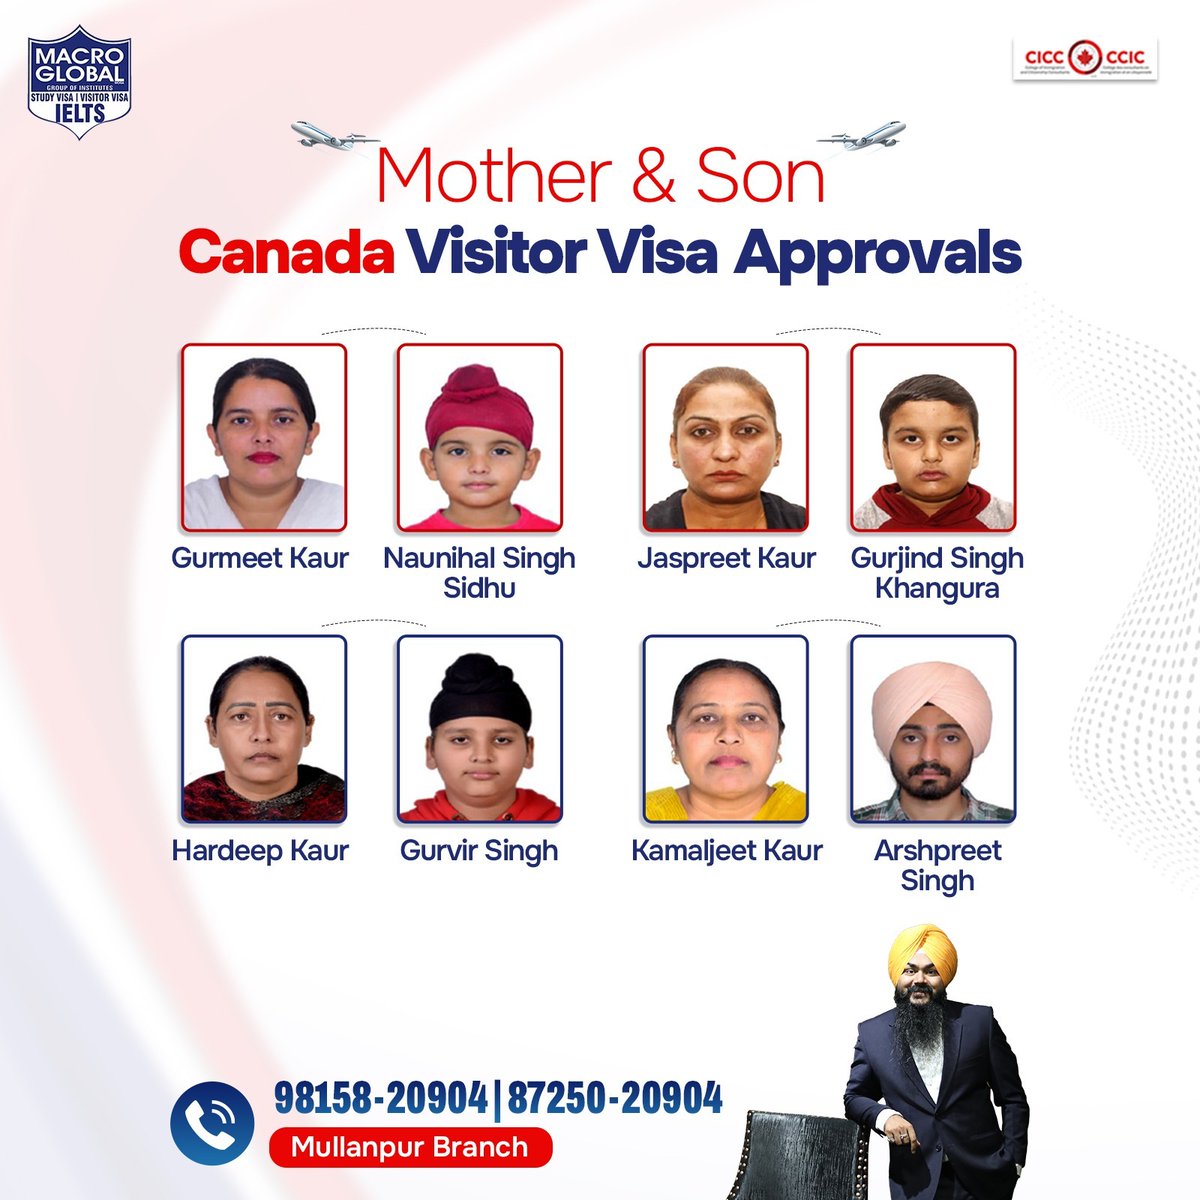 We're overjoyed to celebrate the successful Canadian visitor visa approvals for amazing mothers and sons. Hats off to our expert team.

#MacroGlobal #GurmilapSinghDalla #Canada #Canadastudyvisa #canadaopenworkpermit #spousevisa #Visitorvisa #Visa #IELTS #IELTSTraining